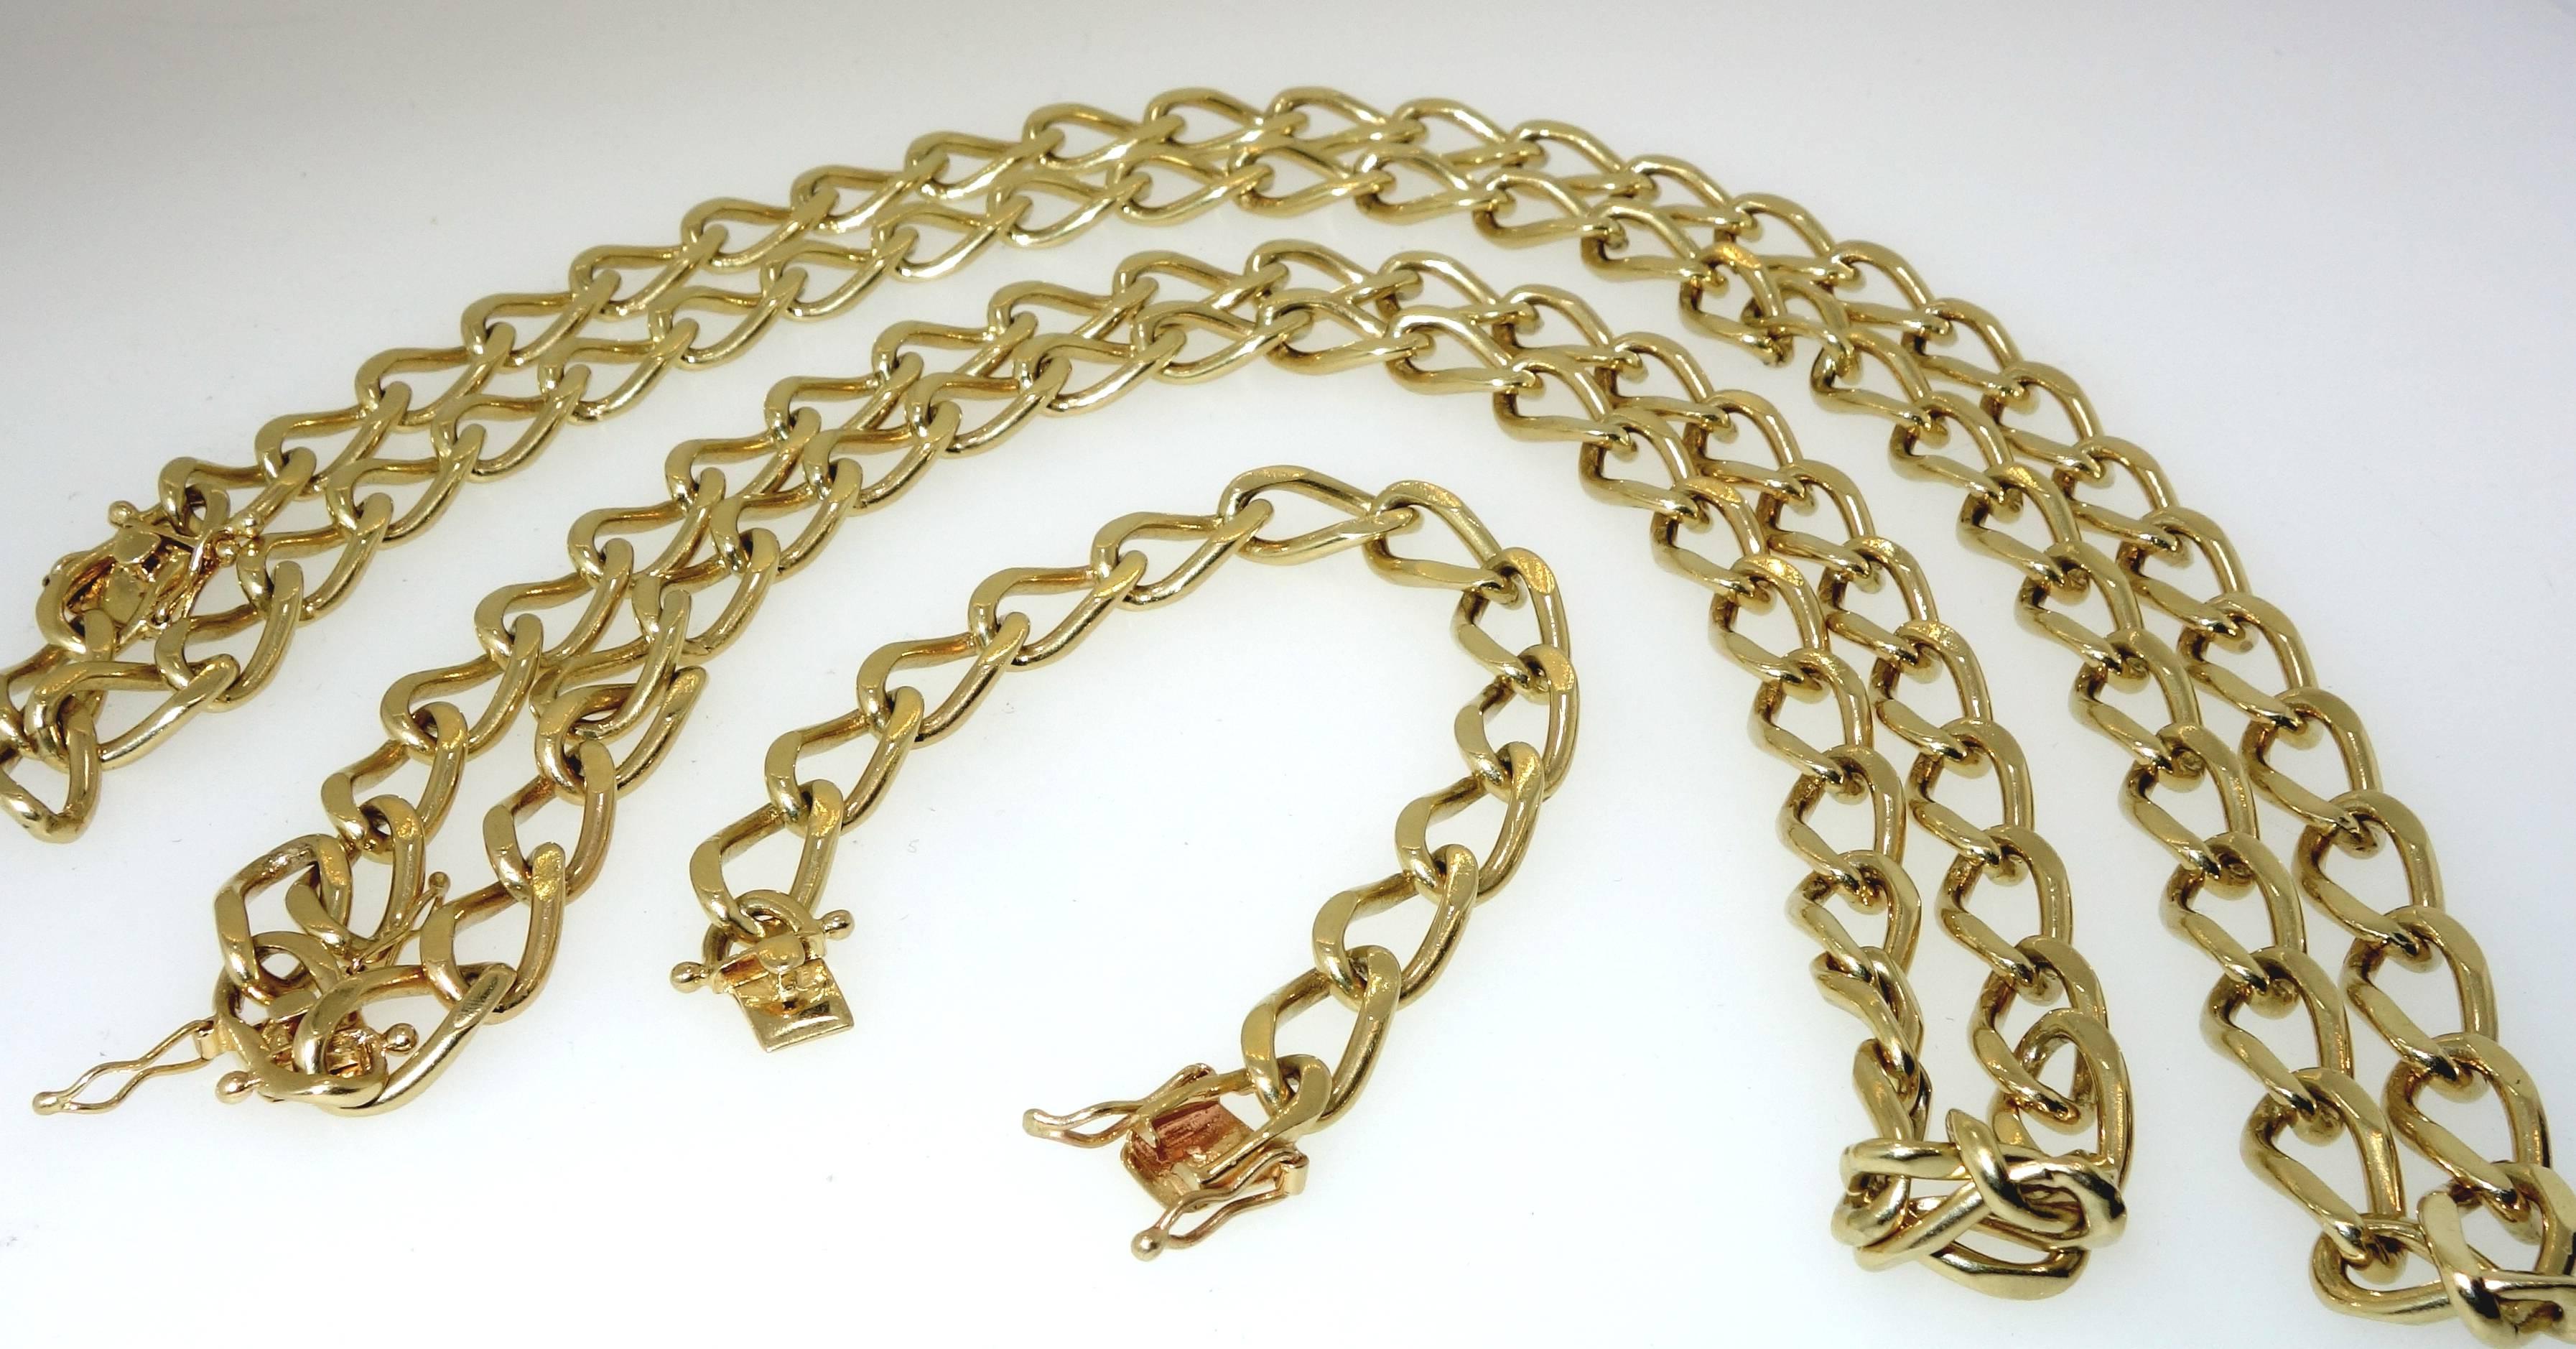 Women's or Men's Long Gold Chain Necklace and Bracelet